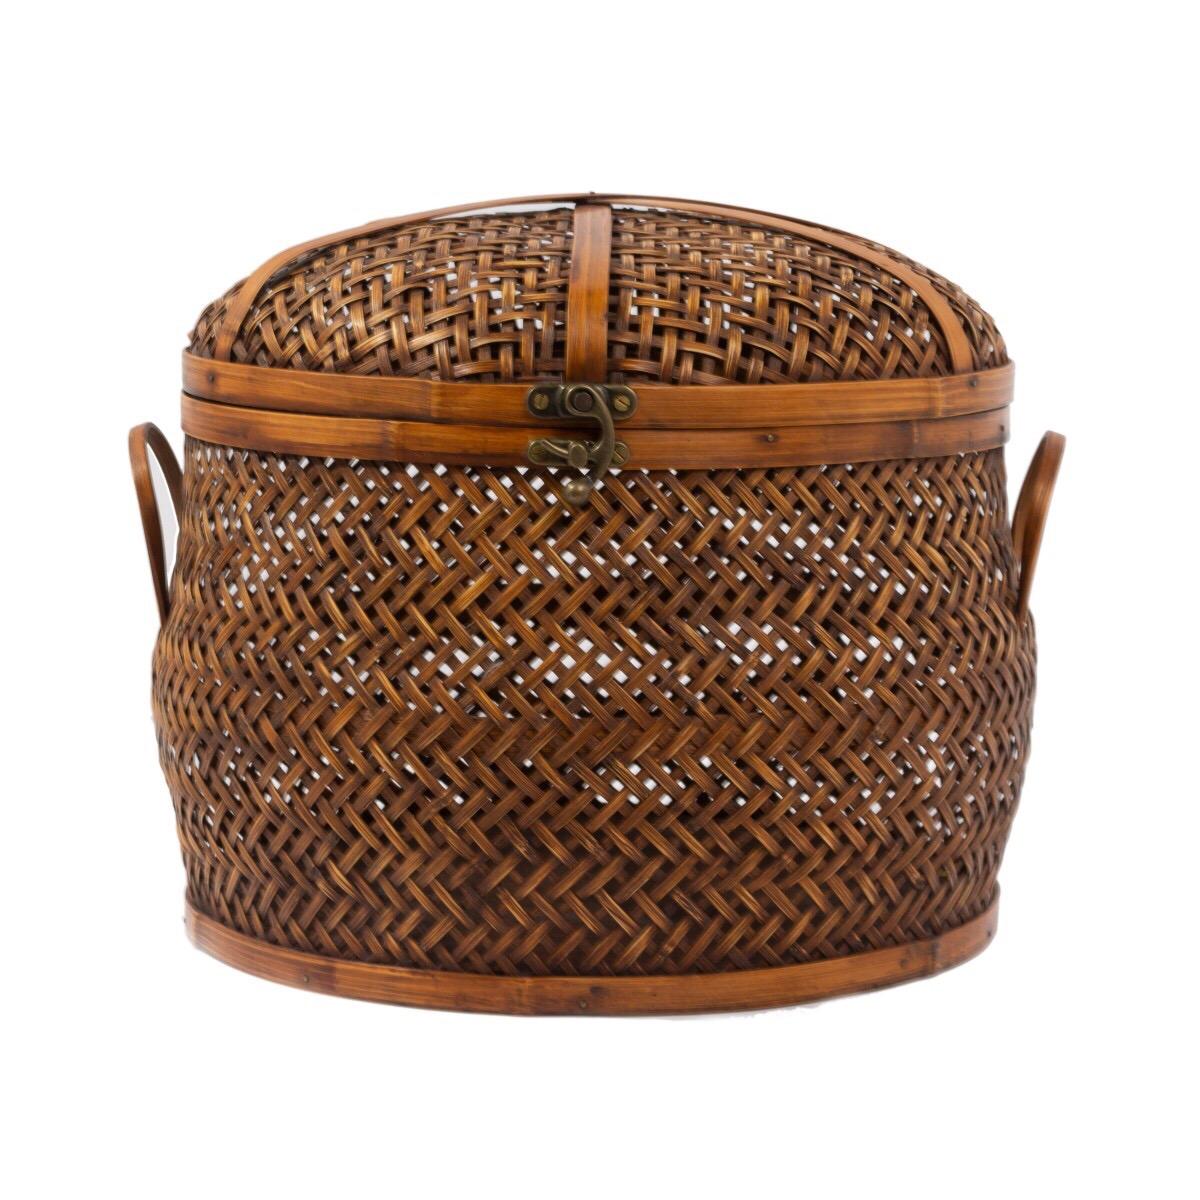 A vintage woven rattan and bamboo basket with attached lid by Takashimaya. Japan, circa 2000.

The famed upscale Japanese retailer Takashimaya was a venerable boutique on Manhattan's Fifth Avenue tht cloed in 2010. Their collection of apparel and